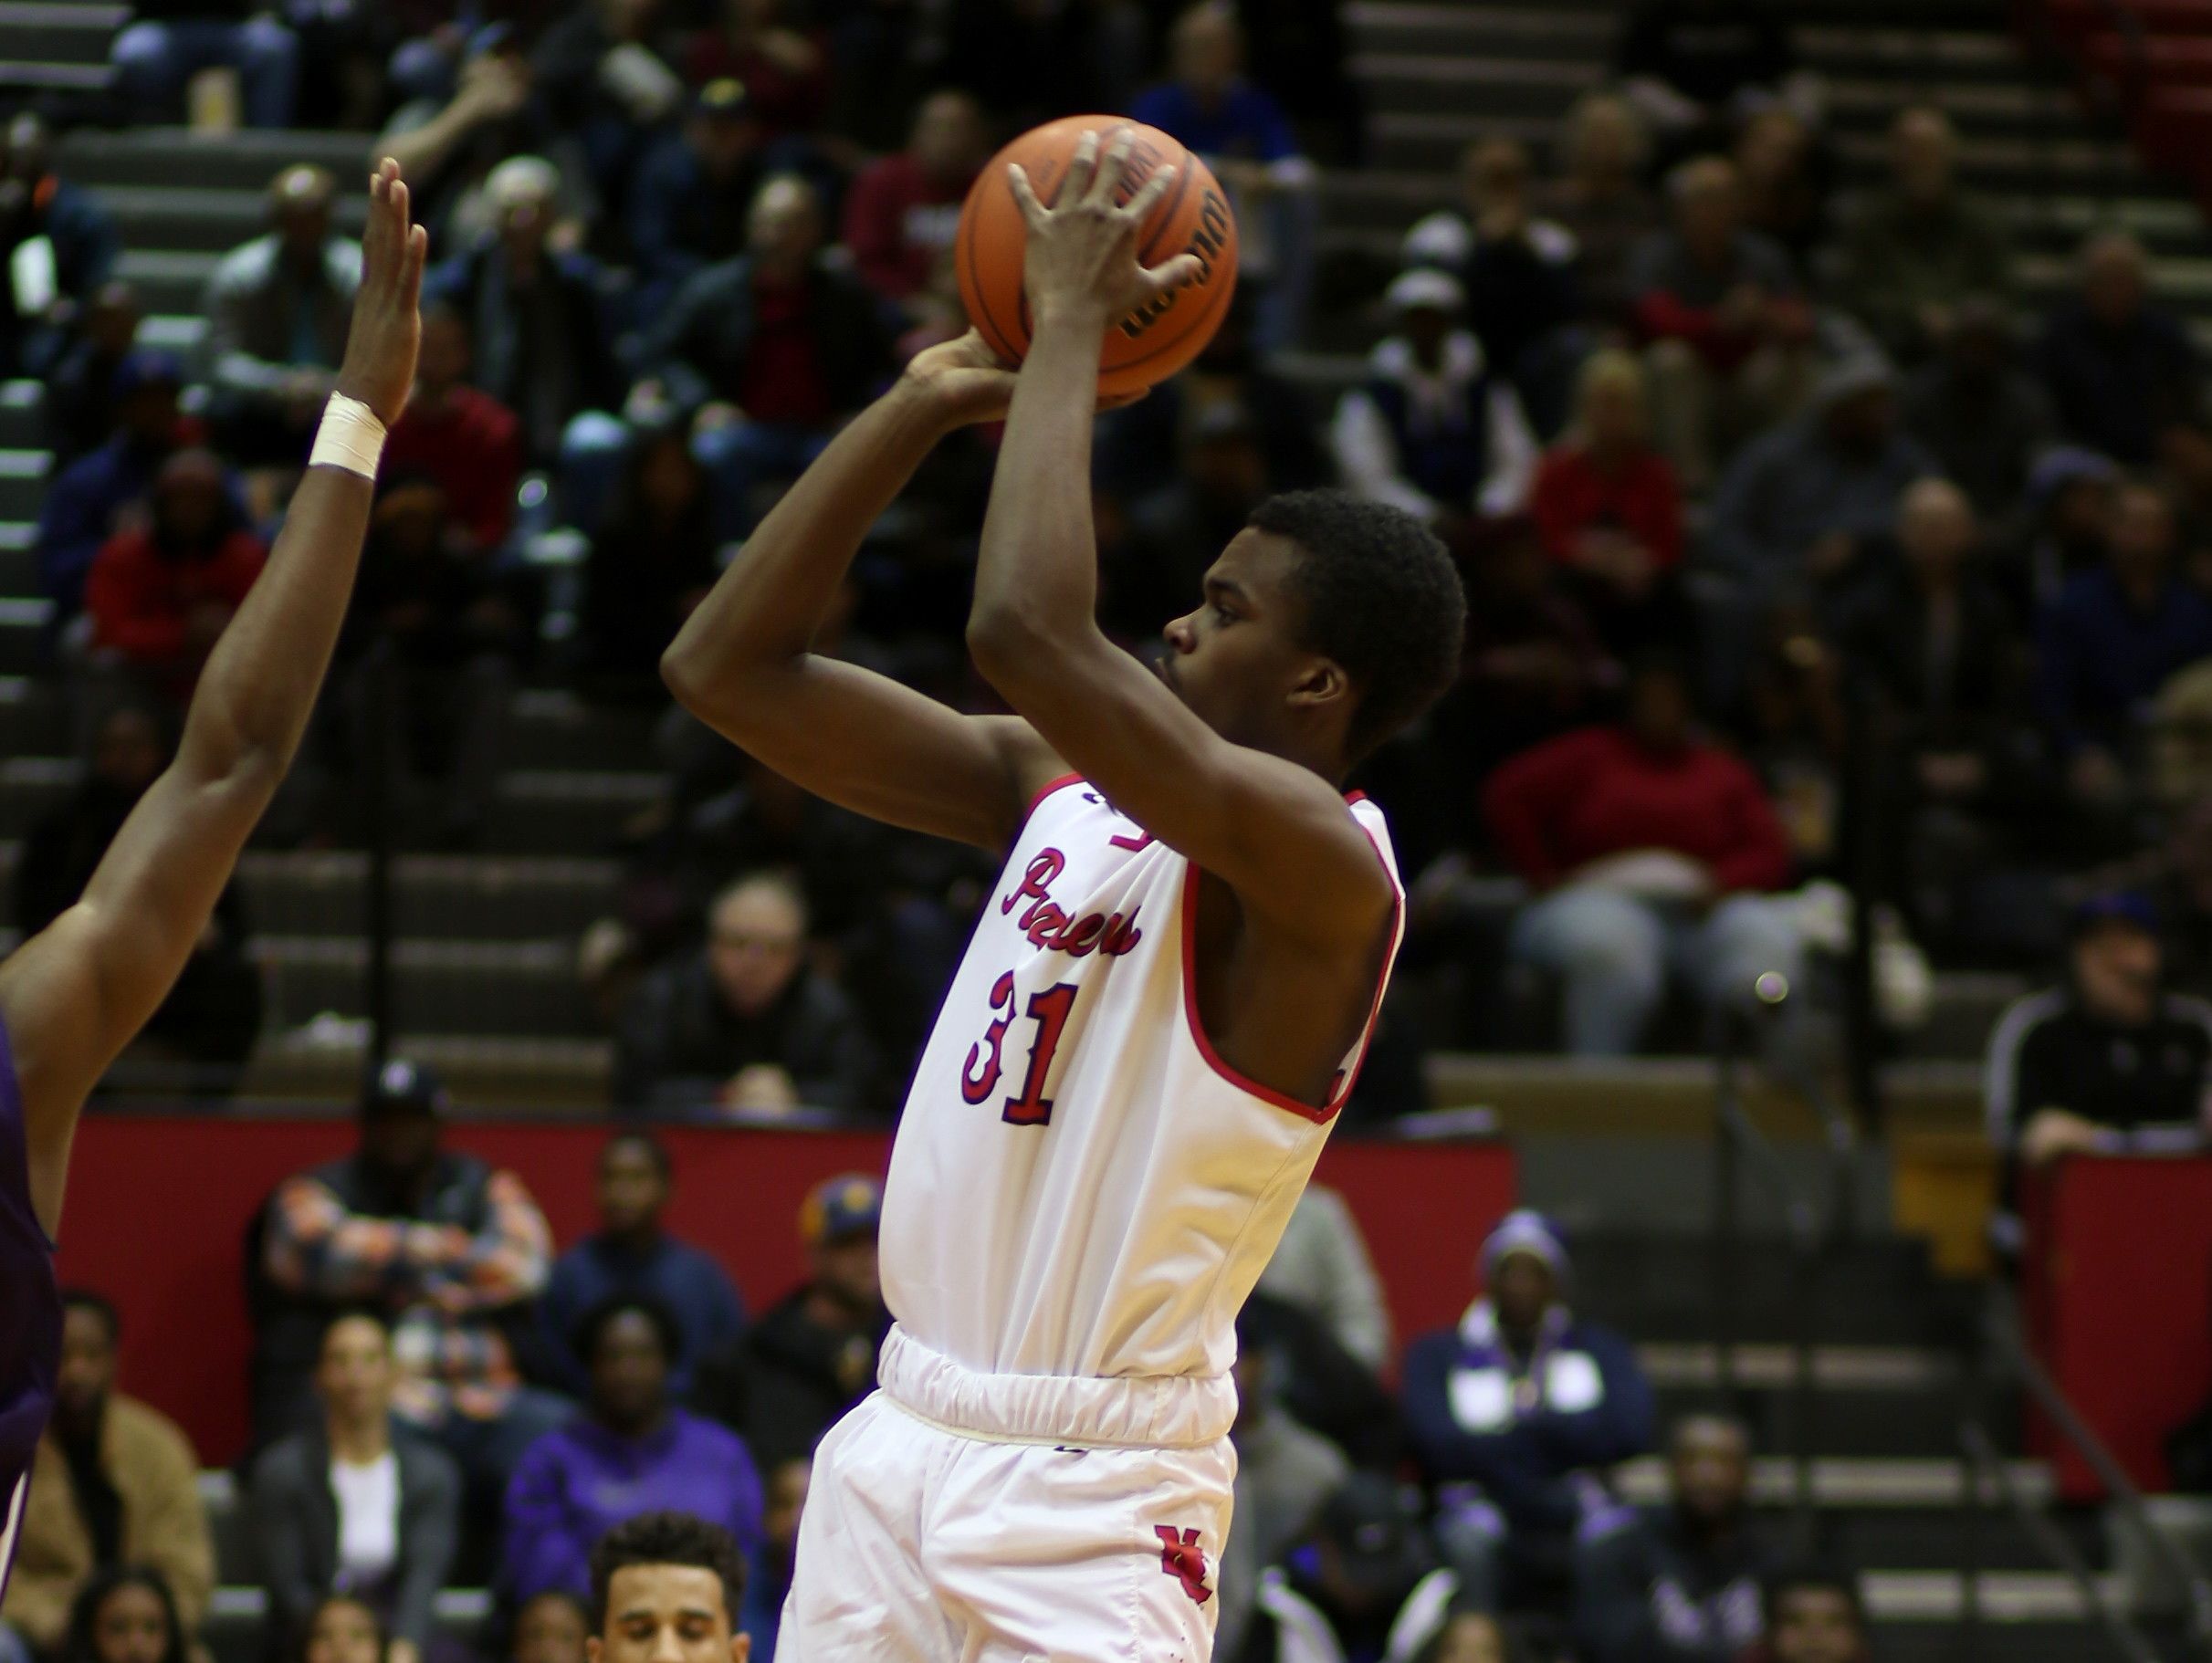 Kris Wilkes debuted a new look in North Central's win over Ben Davis on Friday night.